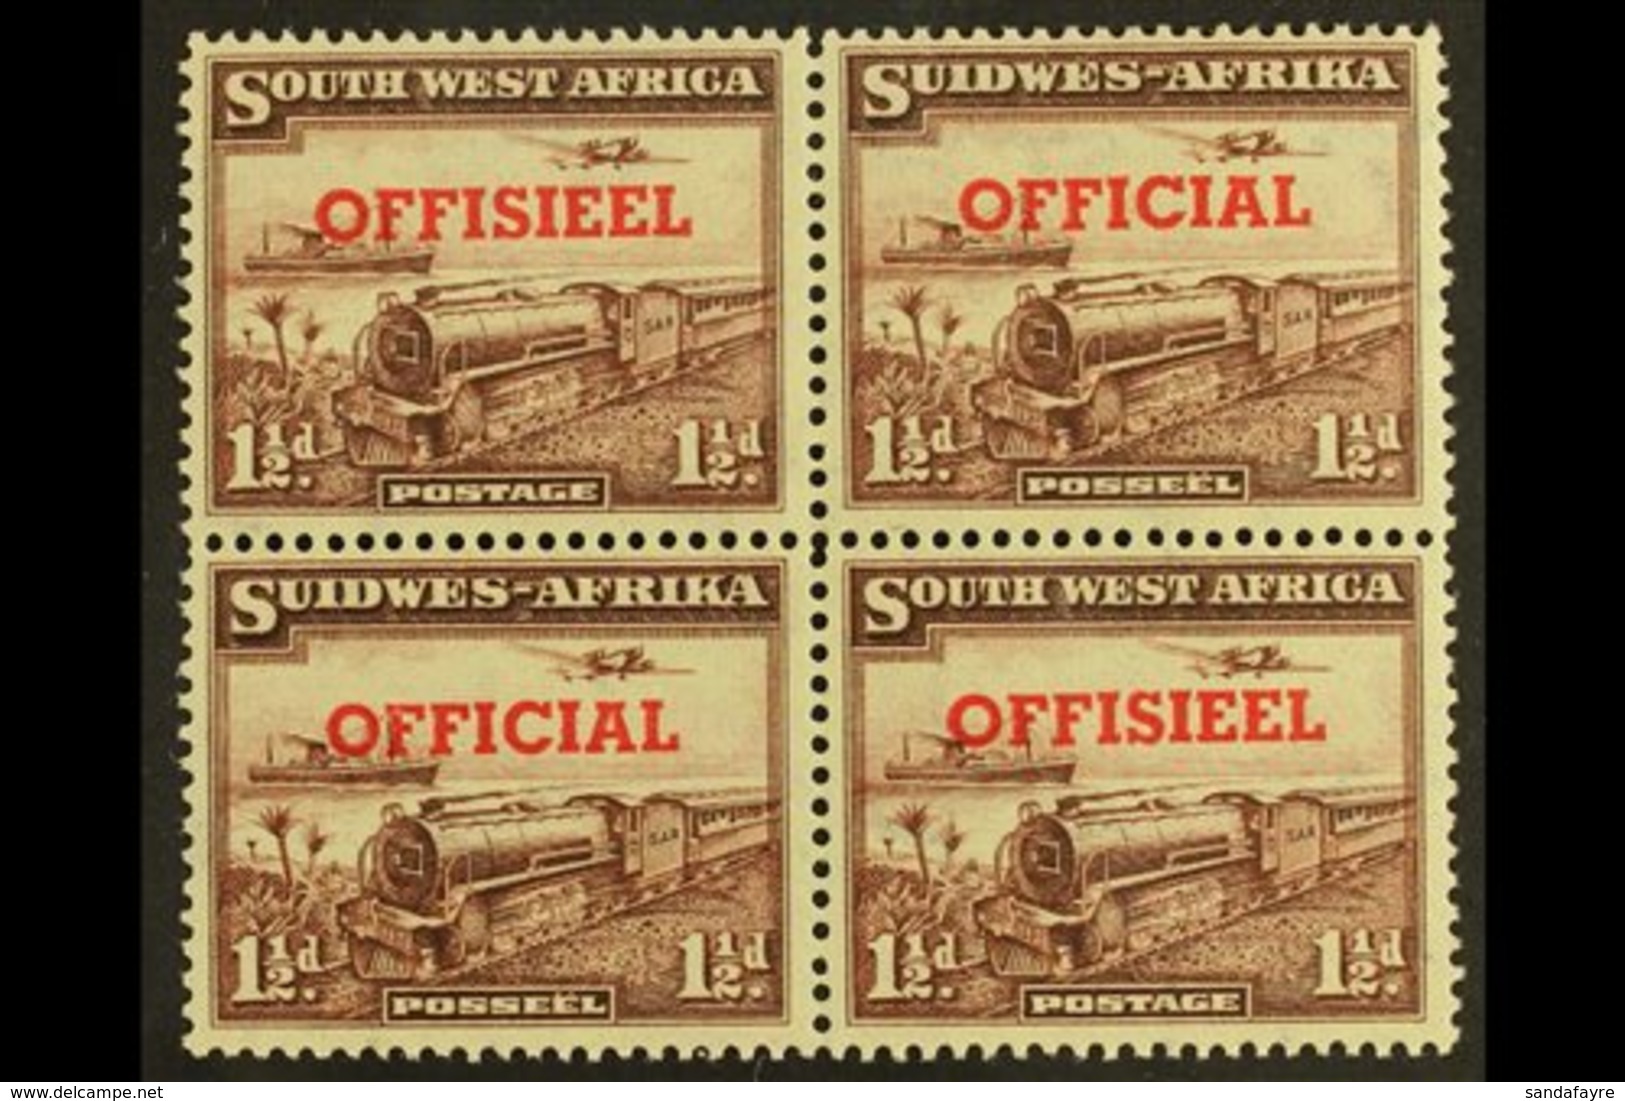 OFFICIAL 1951-2 1½d TRANSPOSED OVERPRINTS In A Block Of Four, SG O25a, Top Pair Lightly Hinged, Lower Pair Never Hinged  - Afrique Du Sud-Ouest (1923-1990)